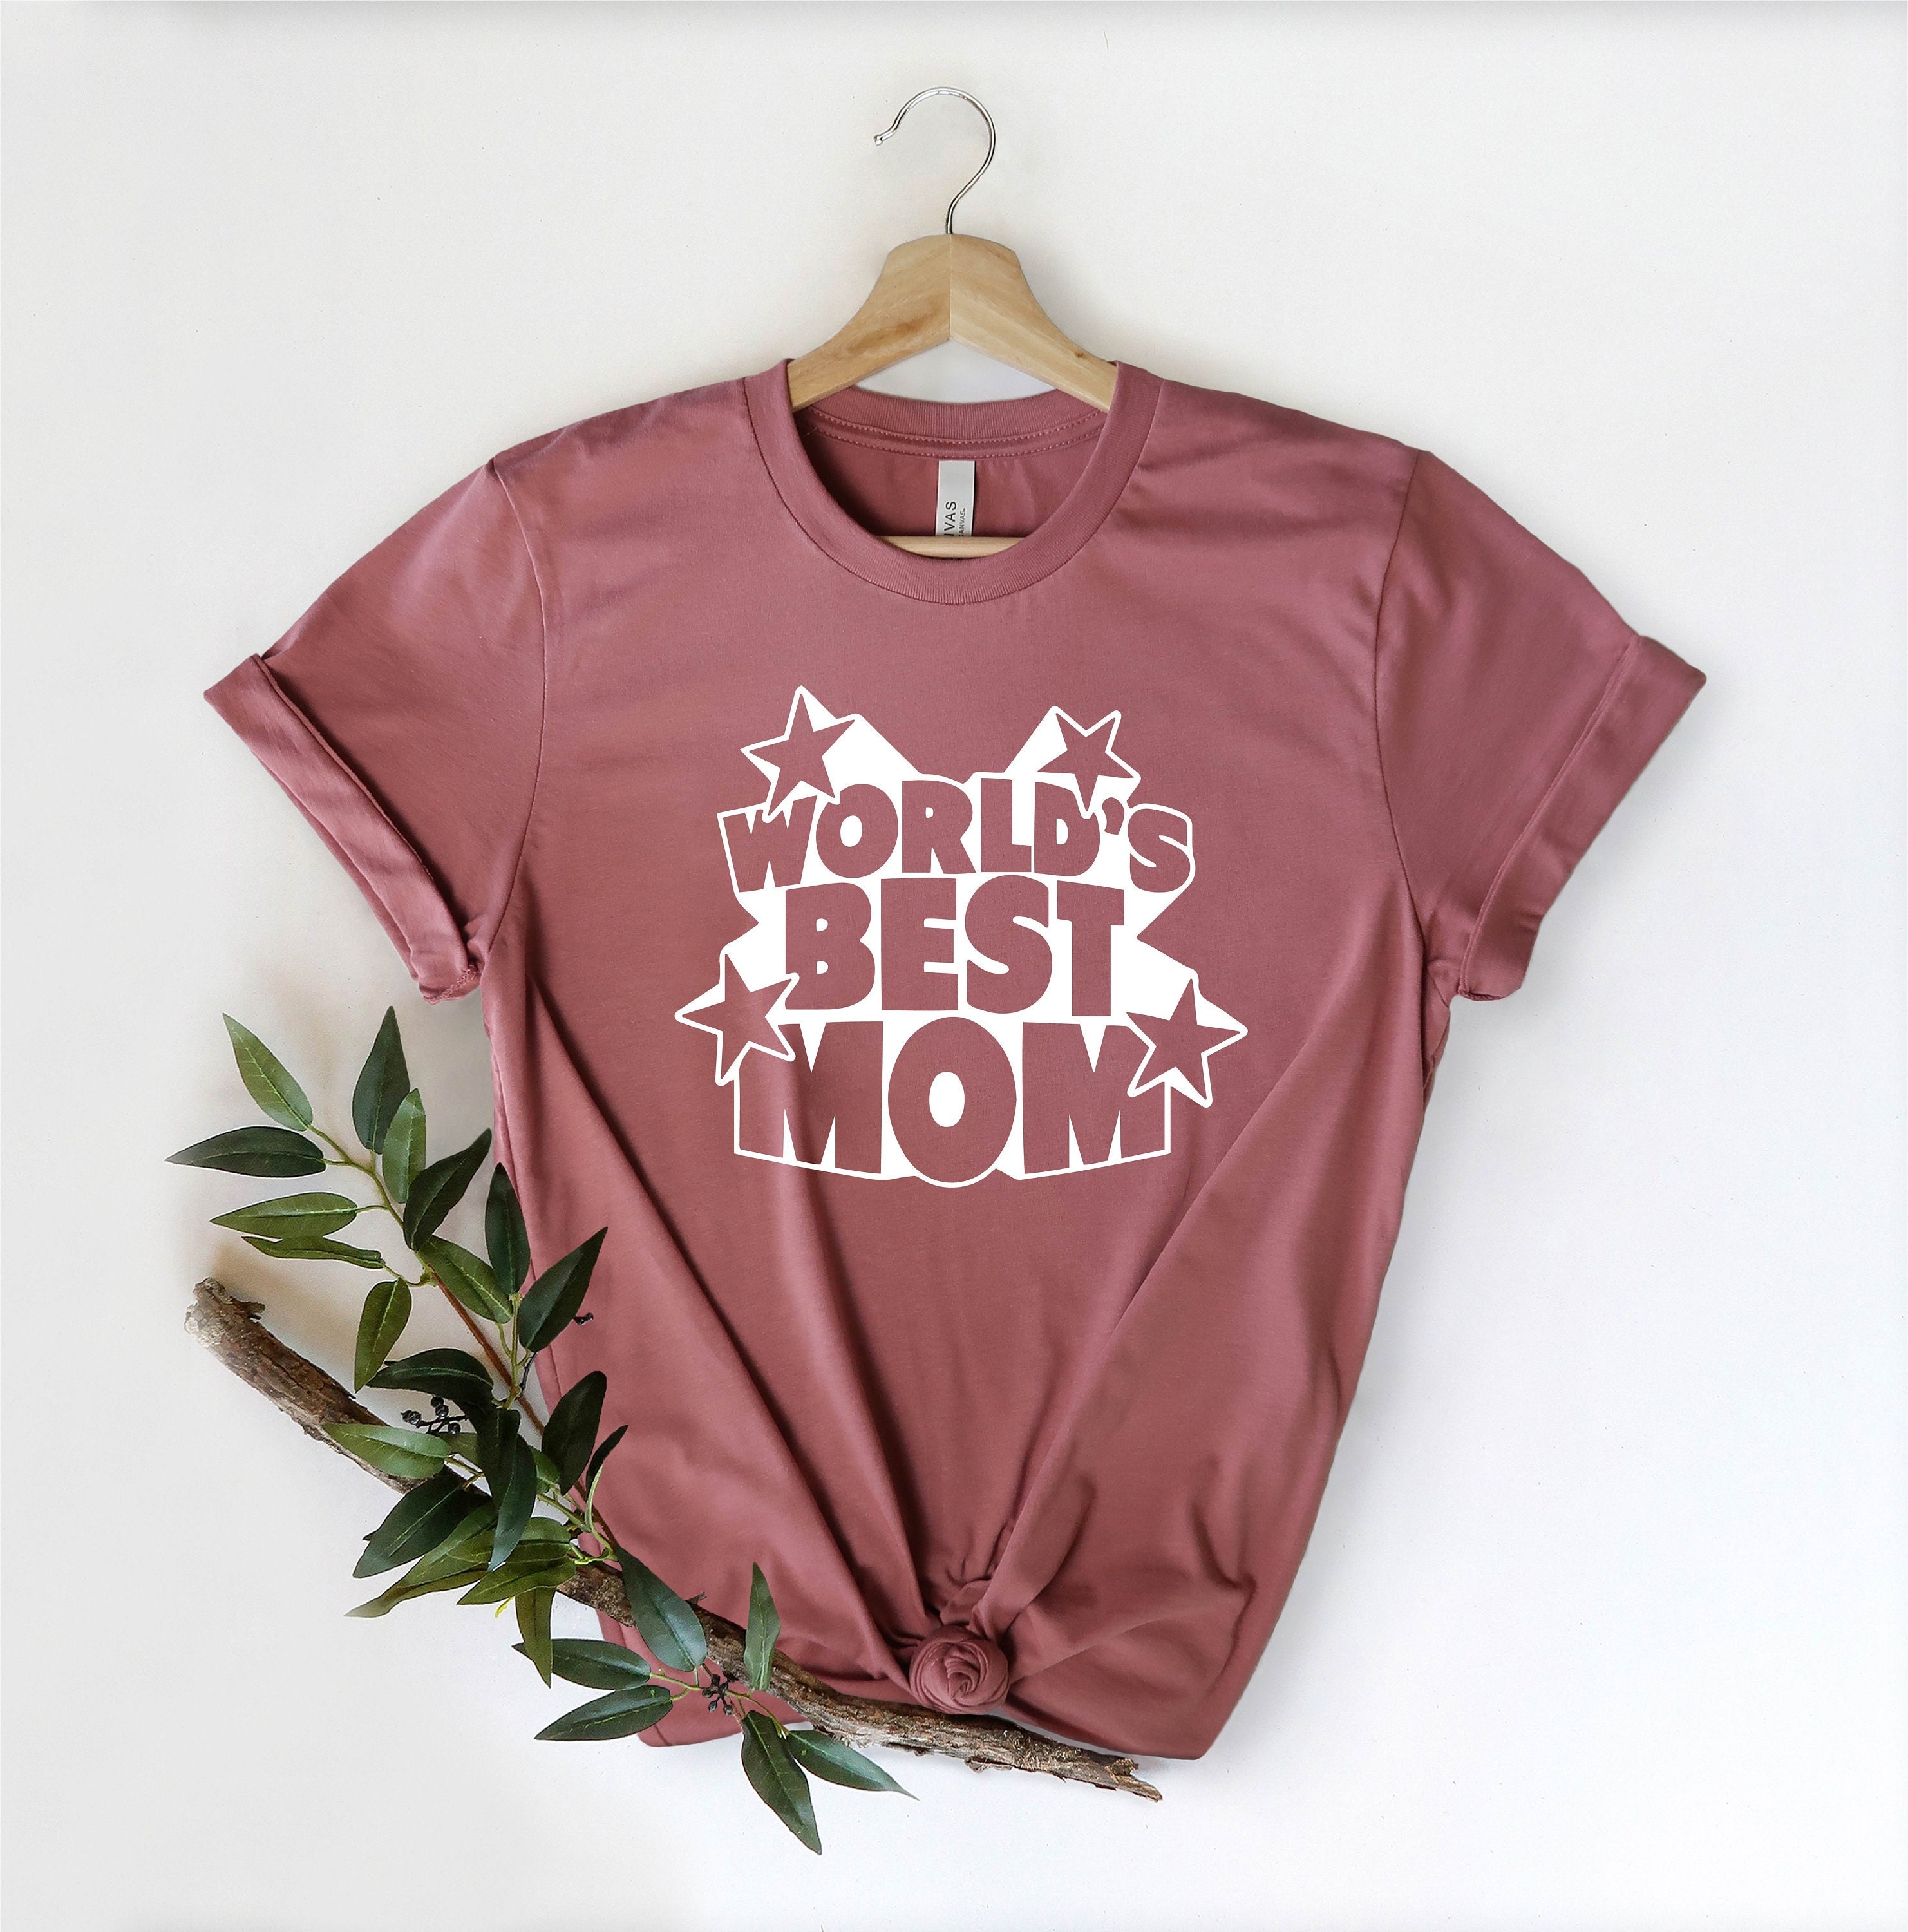 Worlds Best Mom Shirt Mom Shirt Best Mom Shirt Mama T Shirt Mommy Shirt Mom Gifts Mothers Day Shirt Mom Life Shirt Cool Mom Shirt Size Up To 5xl